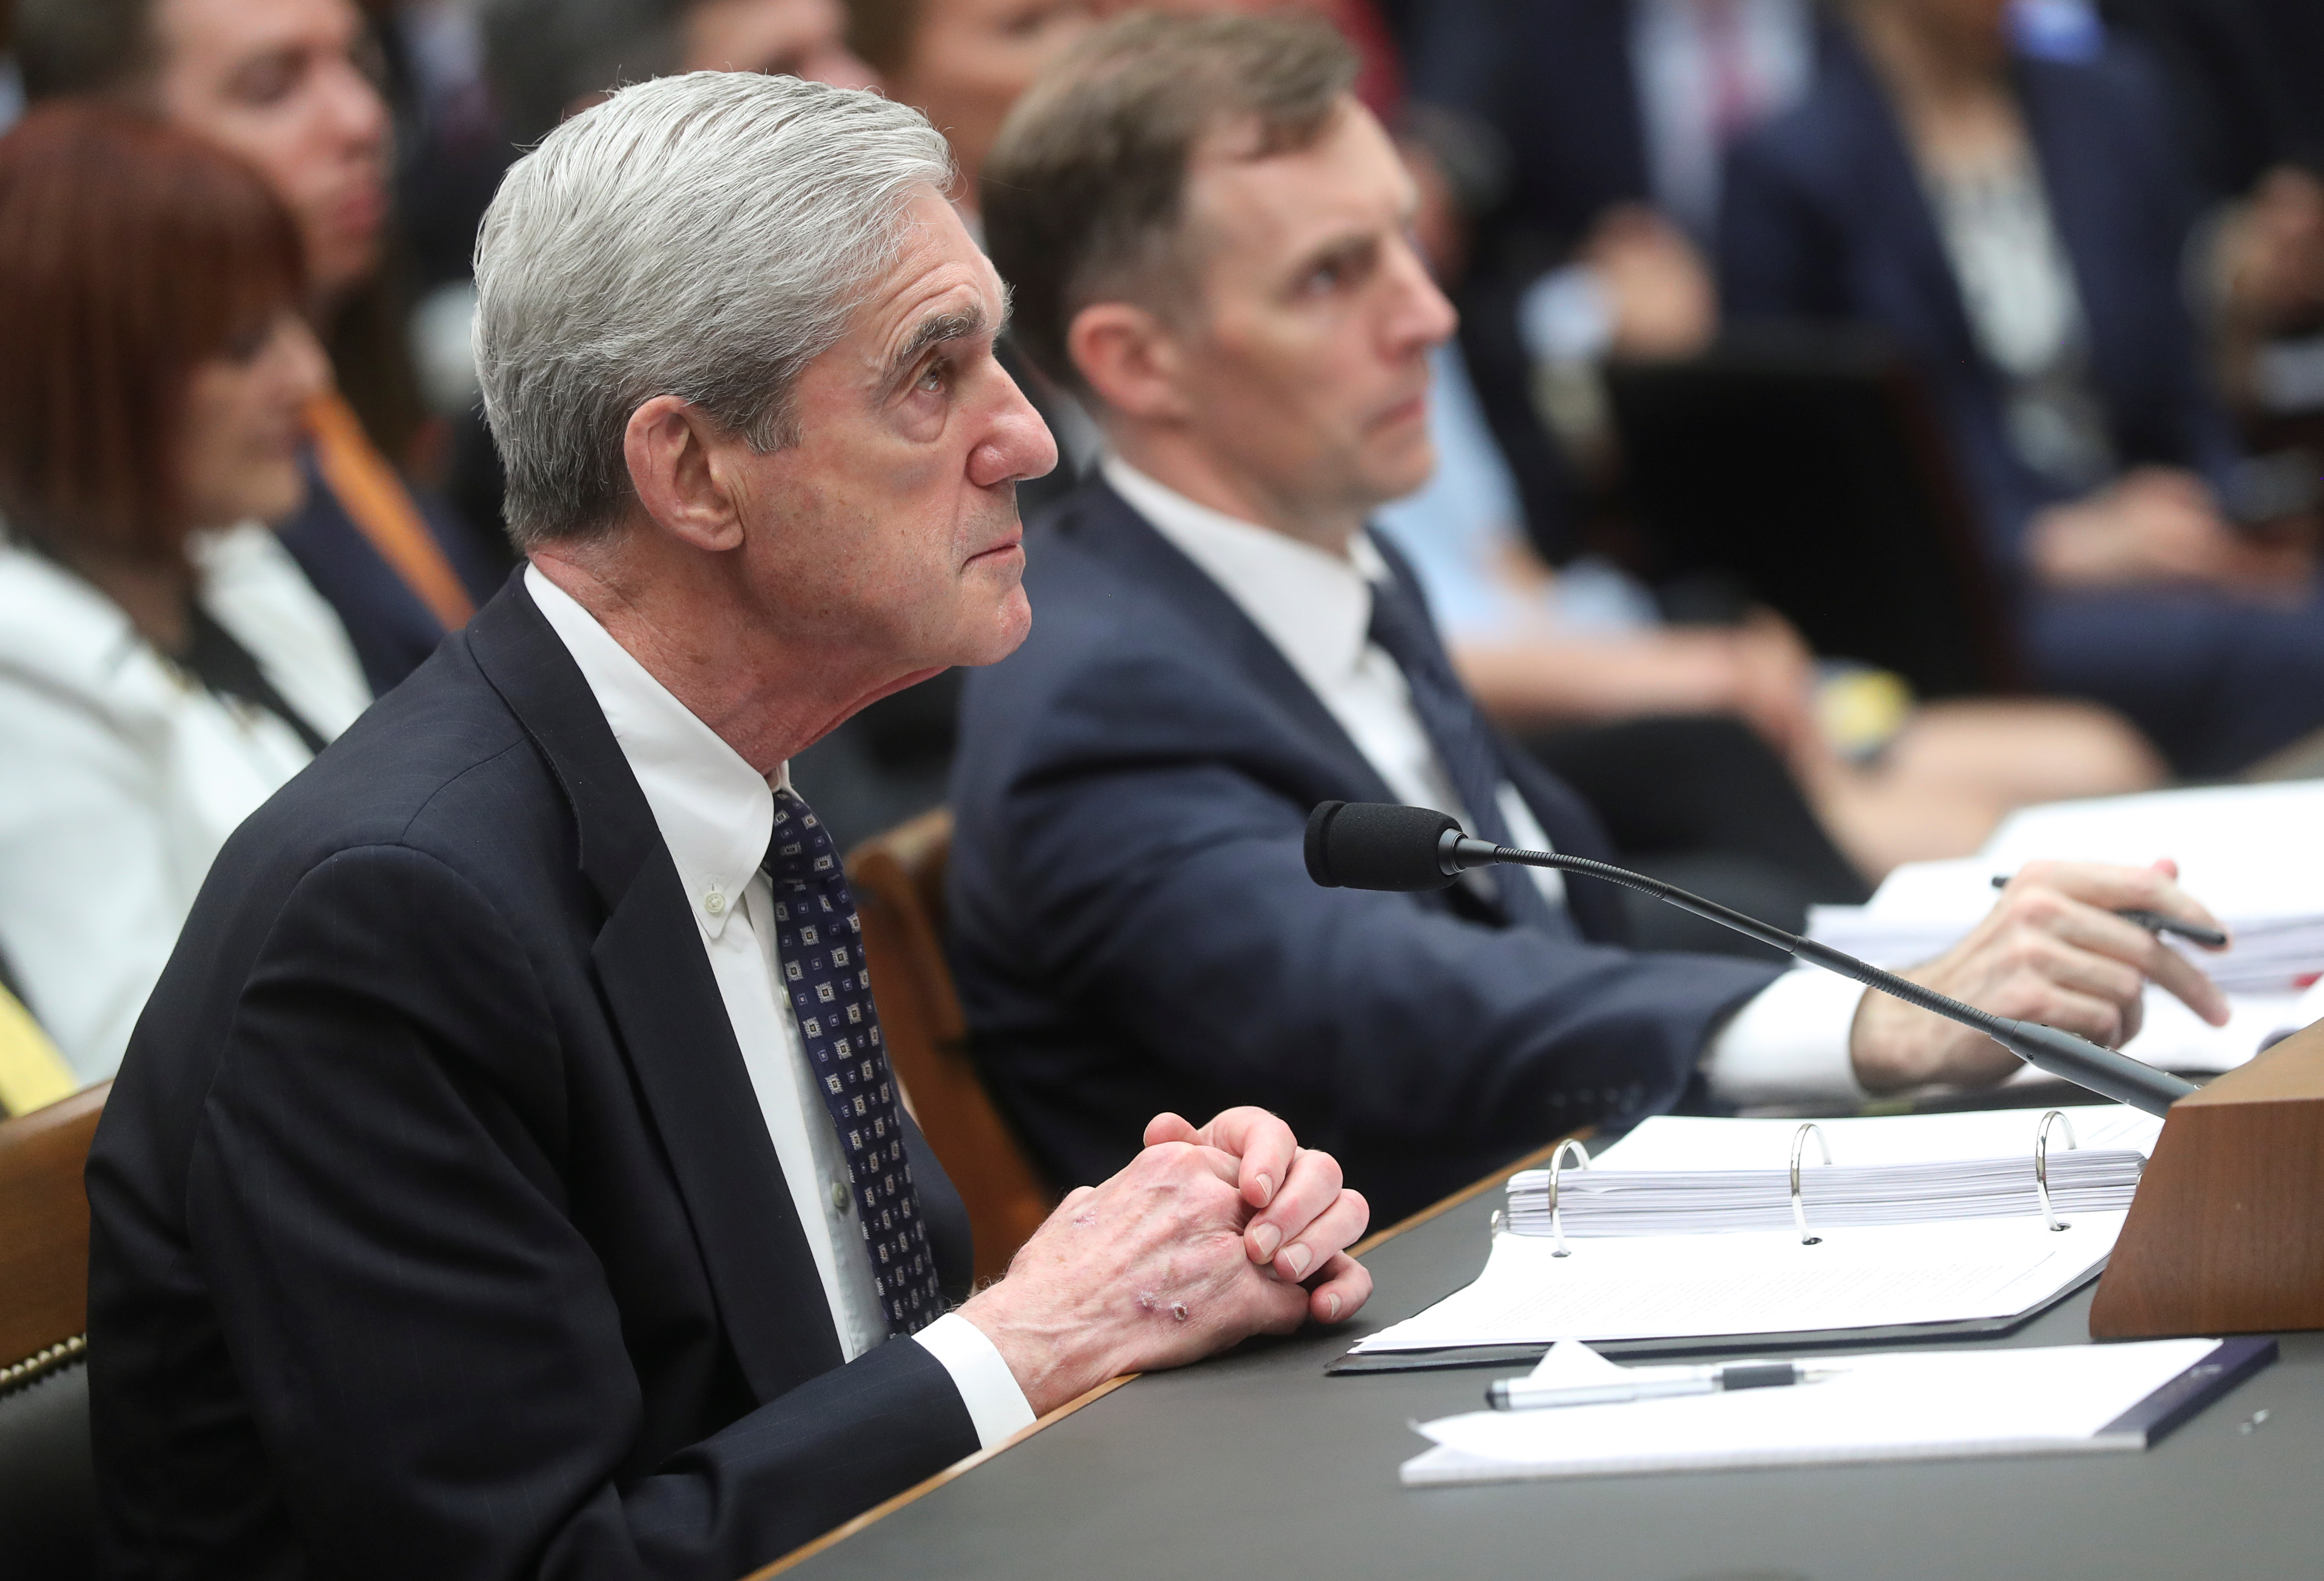 Former Special Counsel Robert Mueller testifies next to Aaron Zebley, his counsel and longtime aide at the FBI, during a House Intelligence Committee hearing on the Office of Special Counsel's investigation into Russian Interference in the 2016 Presidential Election. (REUTERS/Jonathan Ernst)